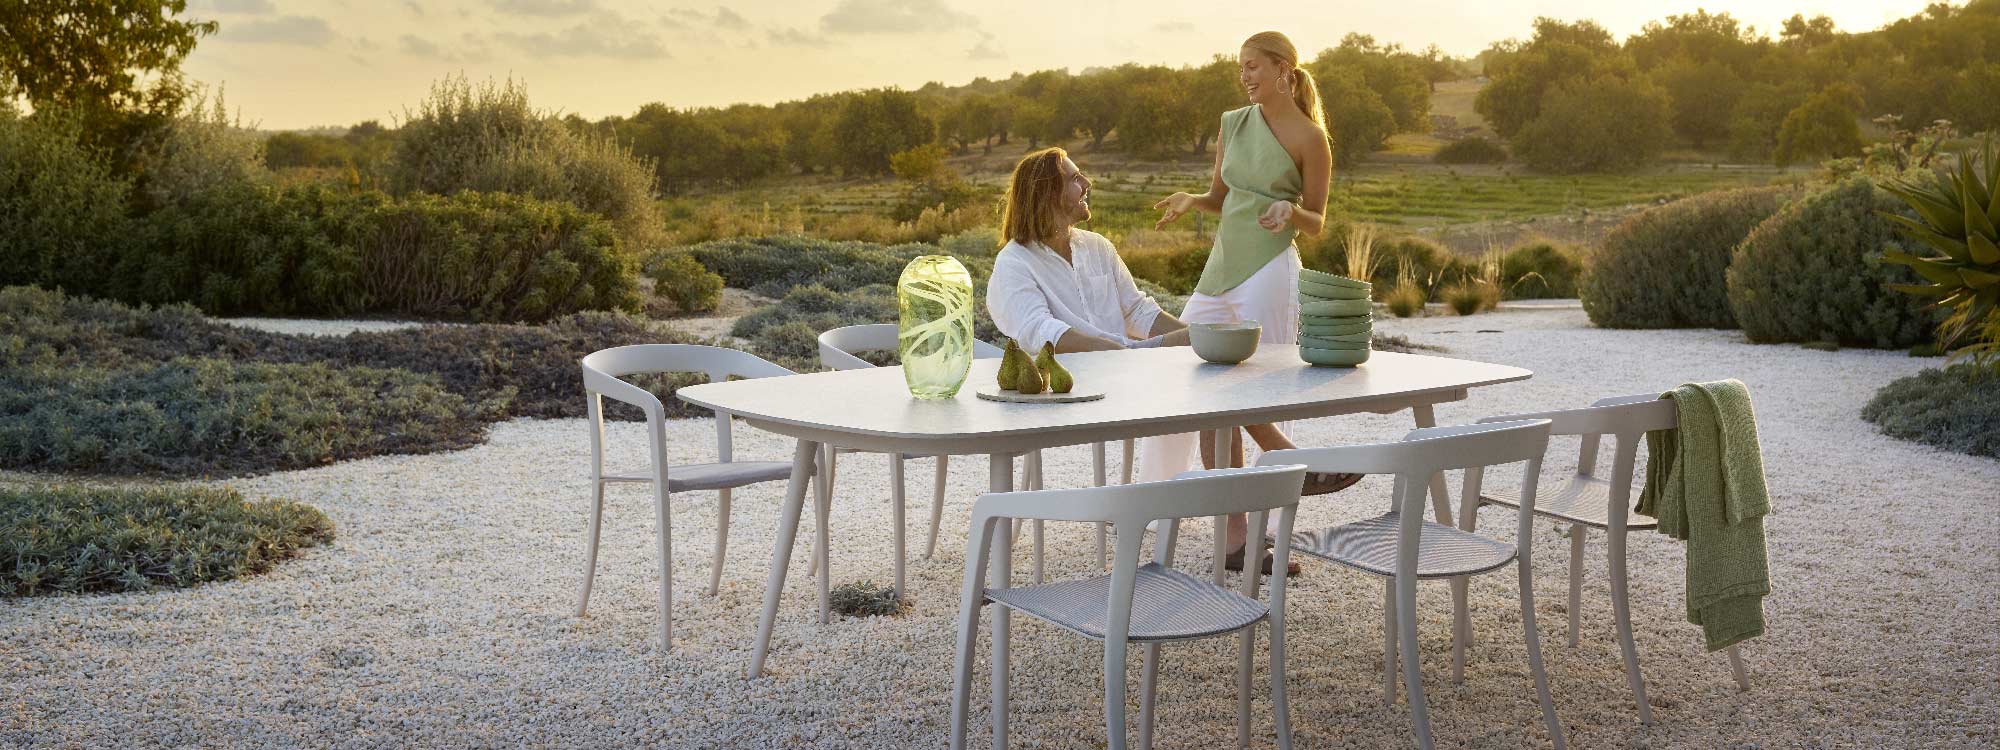 Image of white Styletto garden table and Jive white garden chairs on shingle ground, surrounded by grasses and coastal shrubs